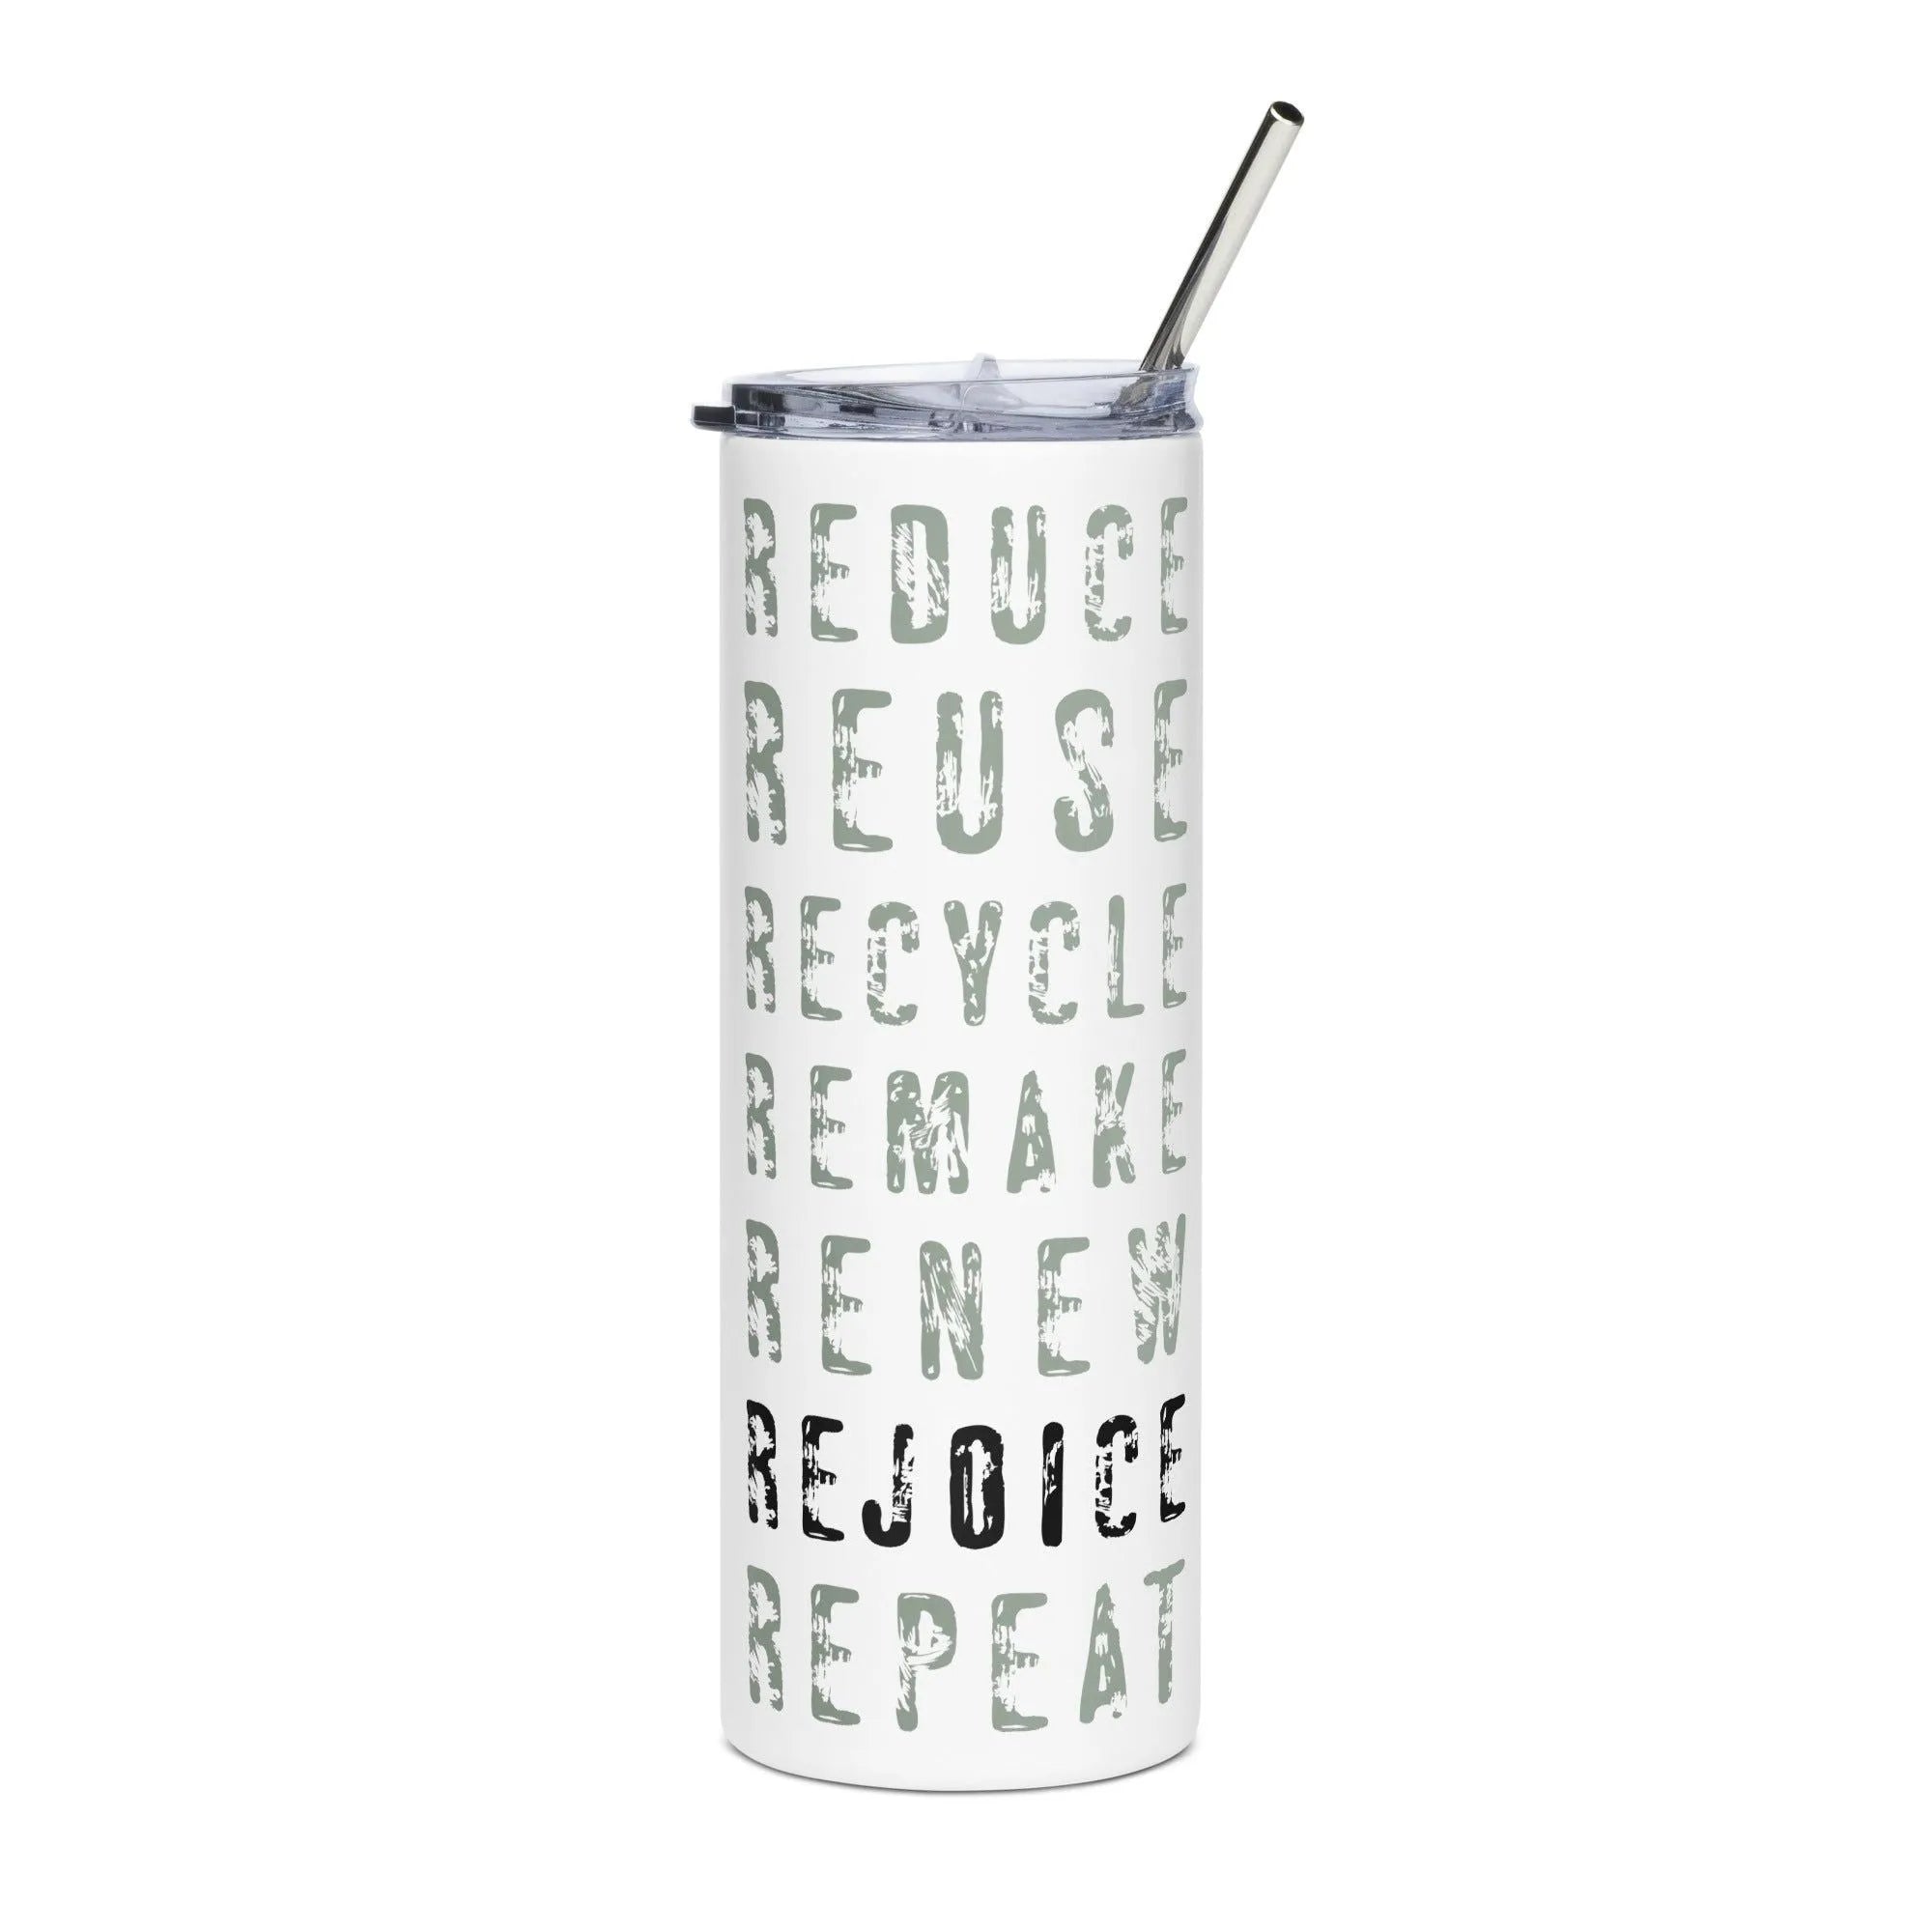 Reduce Reuse Recycle Eco Friendly Stainless steel tumbler with metal straw Rebel Girl Rampage